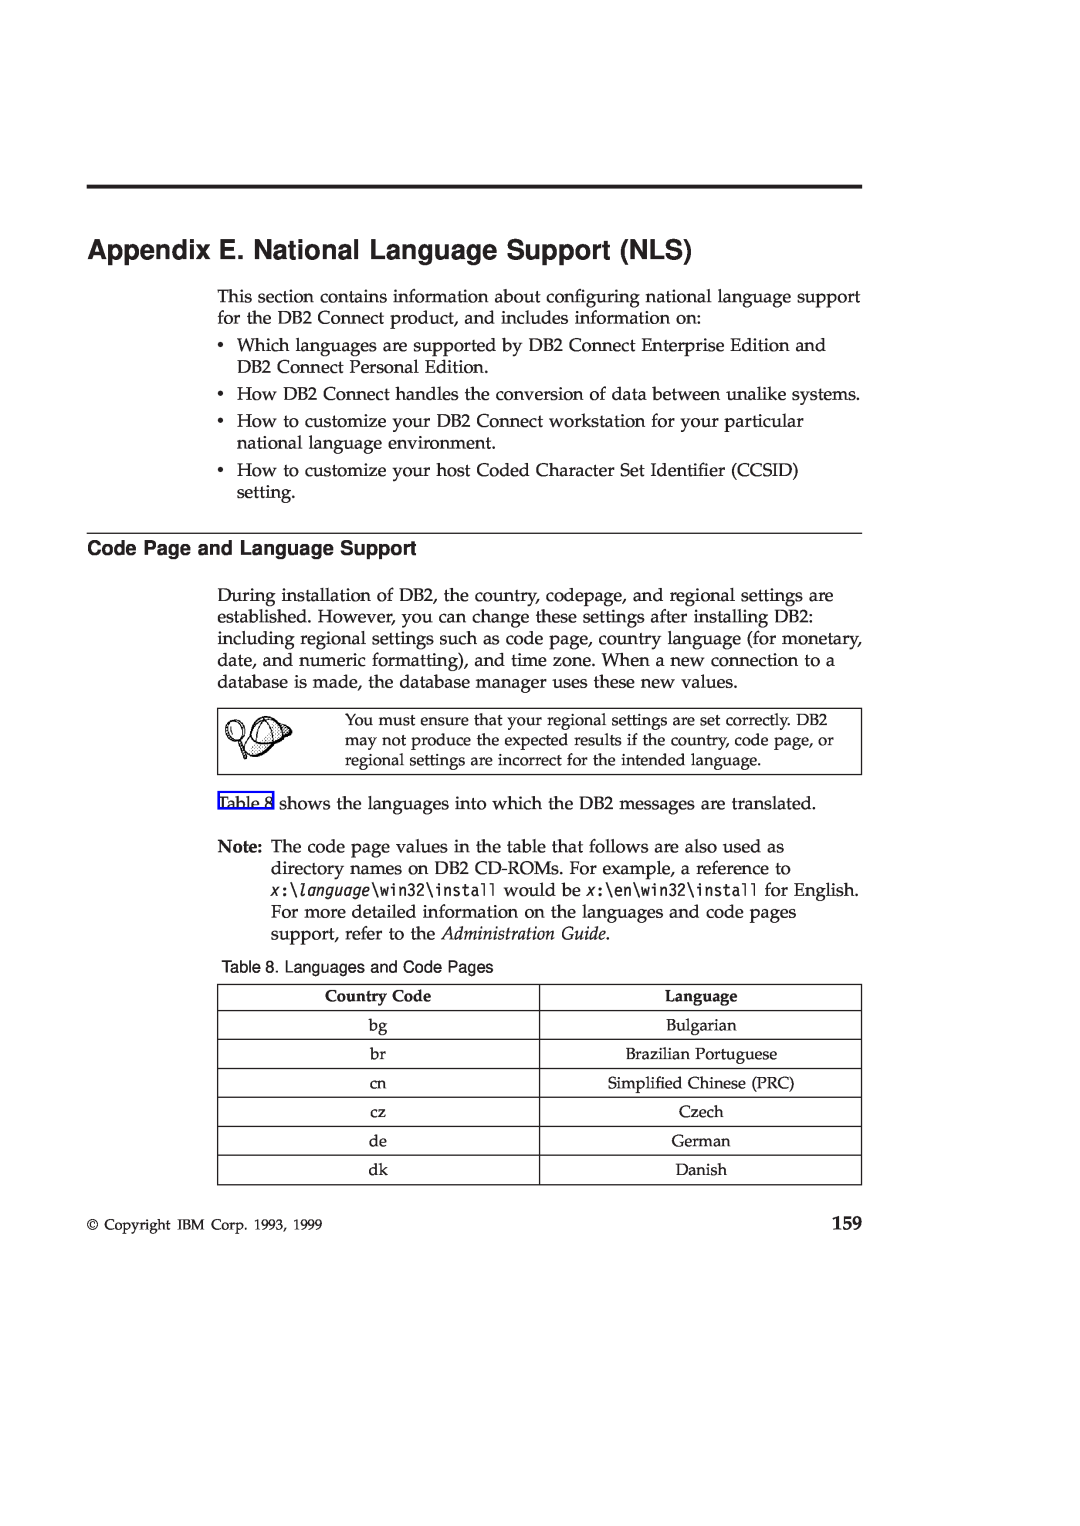 IBM GC09-2830-00 manual Appendix E. National Language Support NLS, Code Page and Language Support 